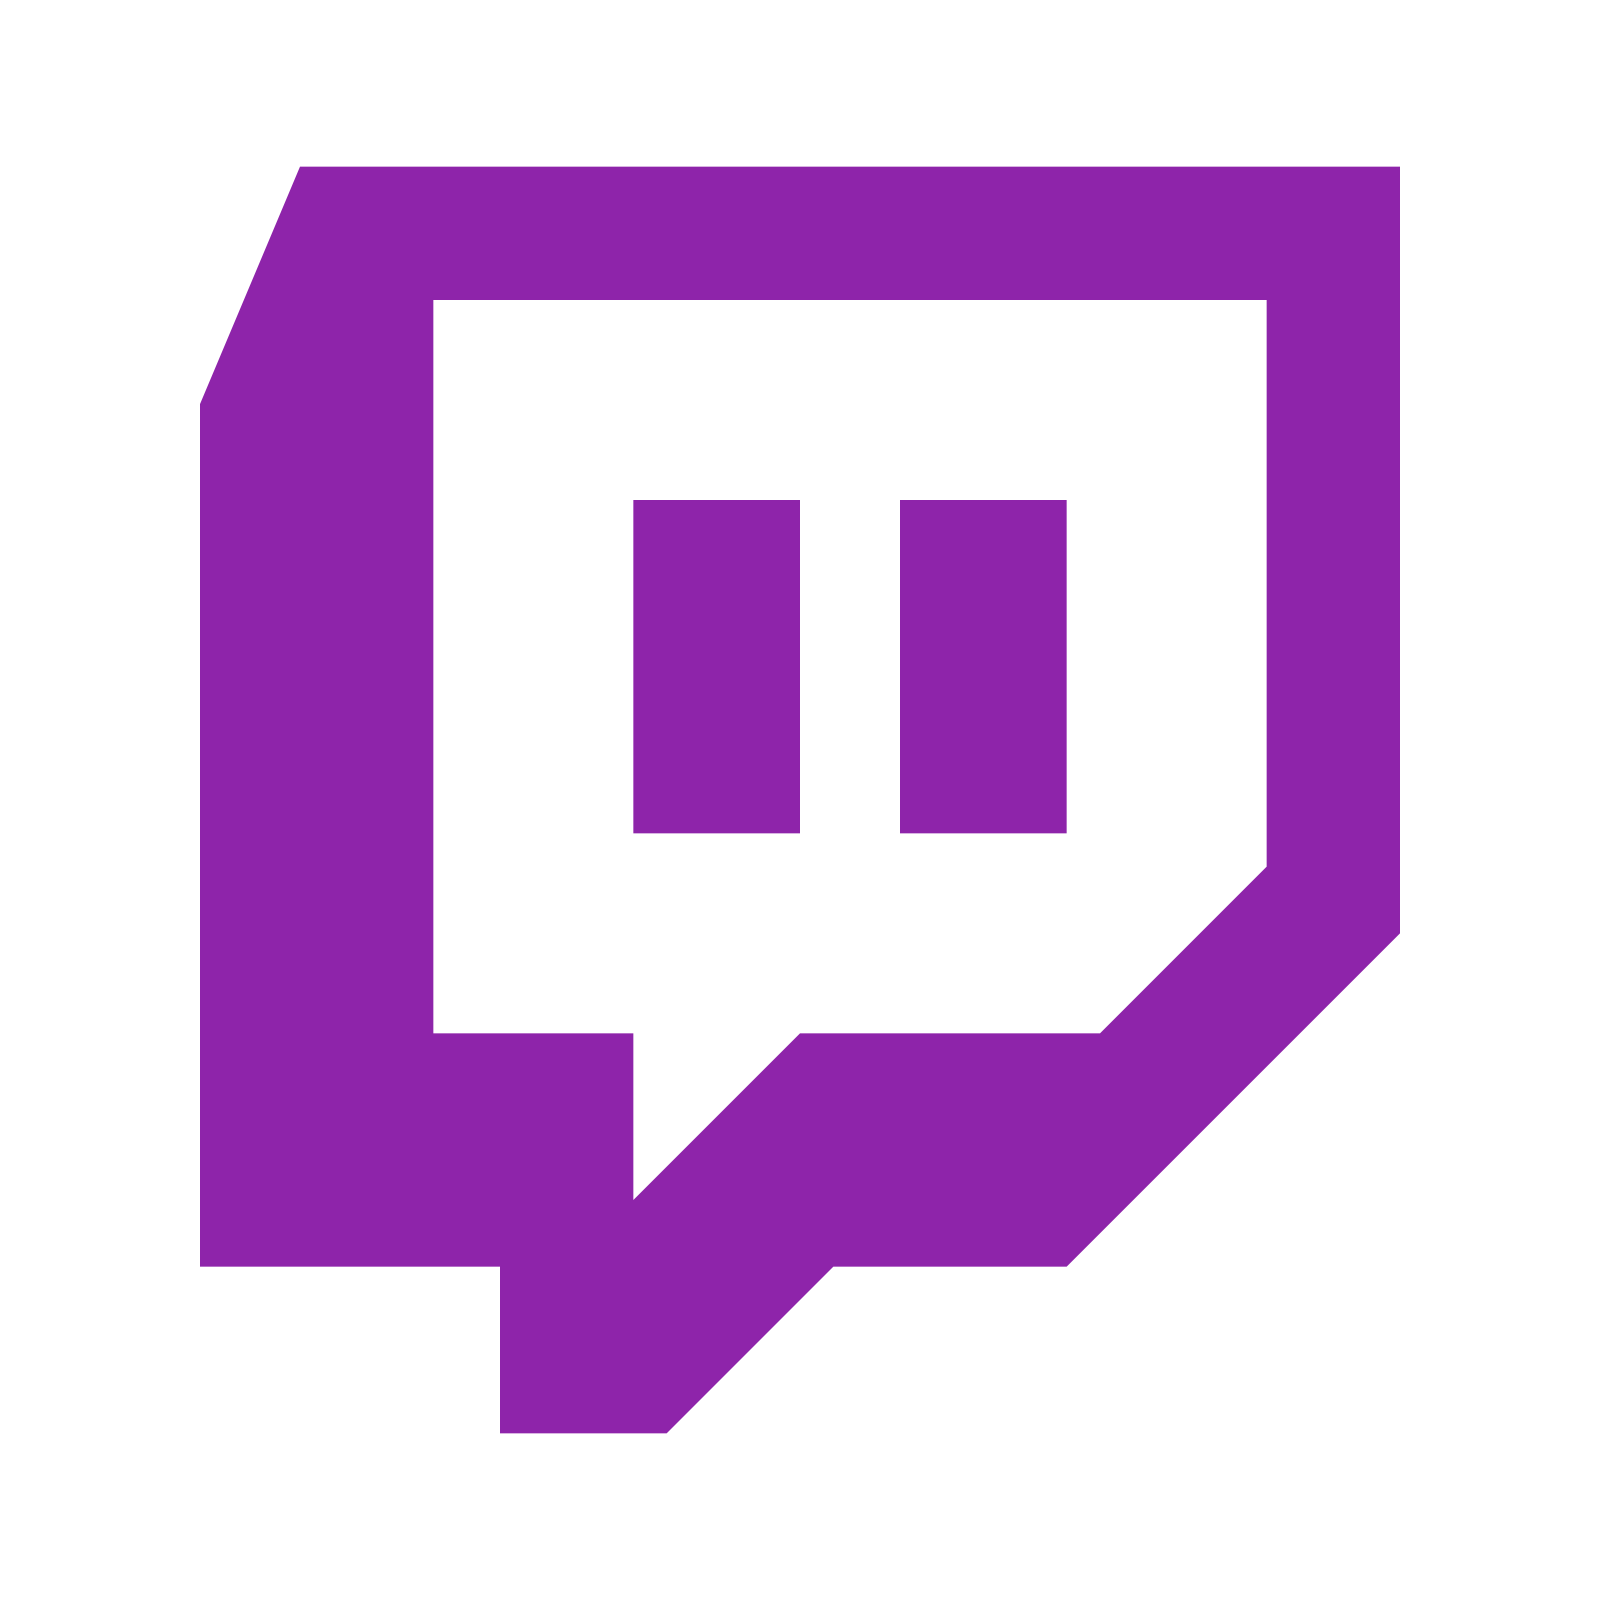 Twitch Logo - Twitch logo PNG images free download